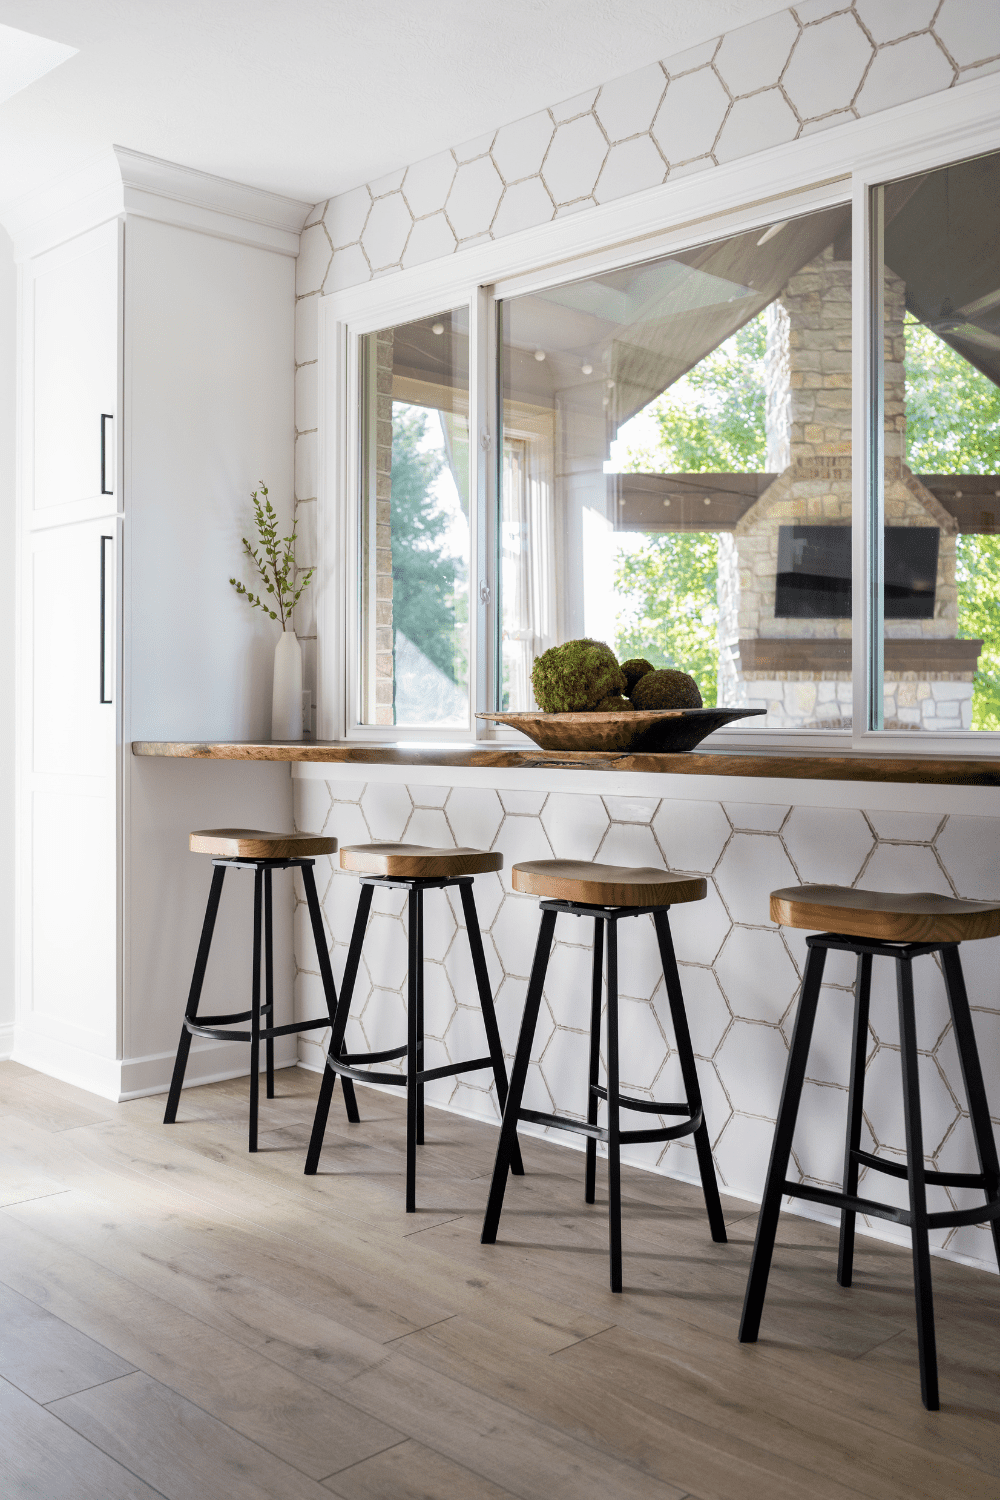 Nicholas Design Build | A kitchen with bar stools and a window.